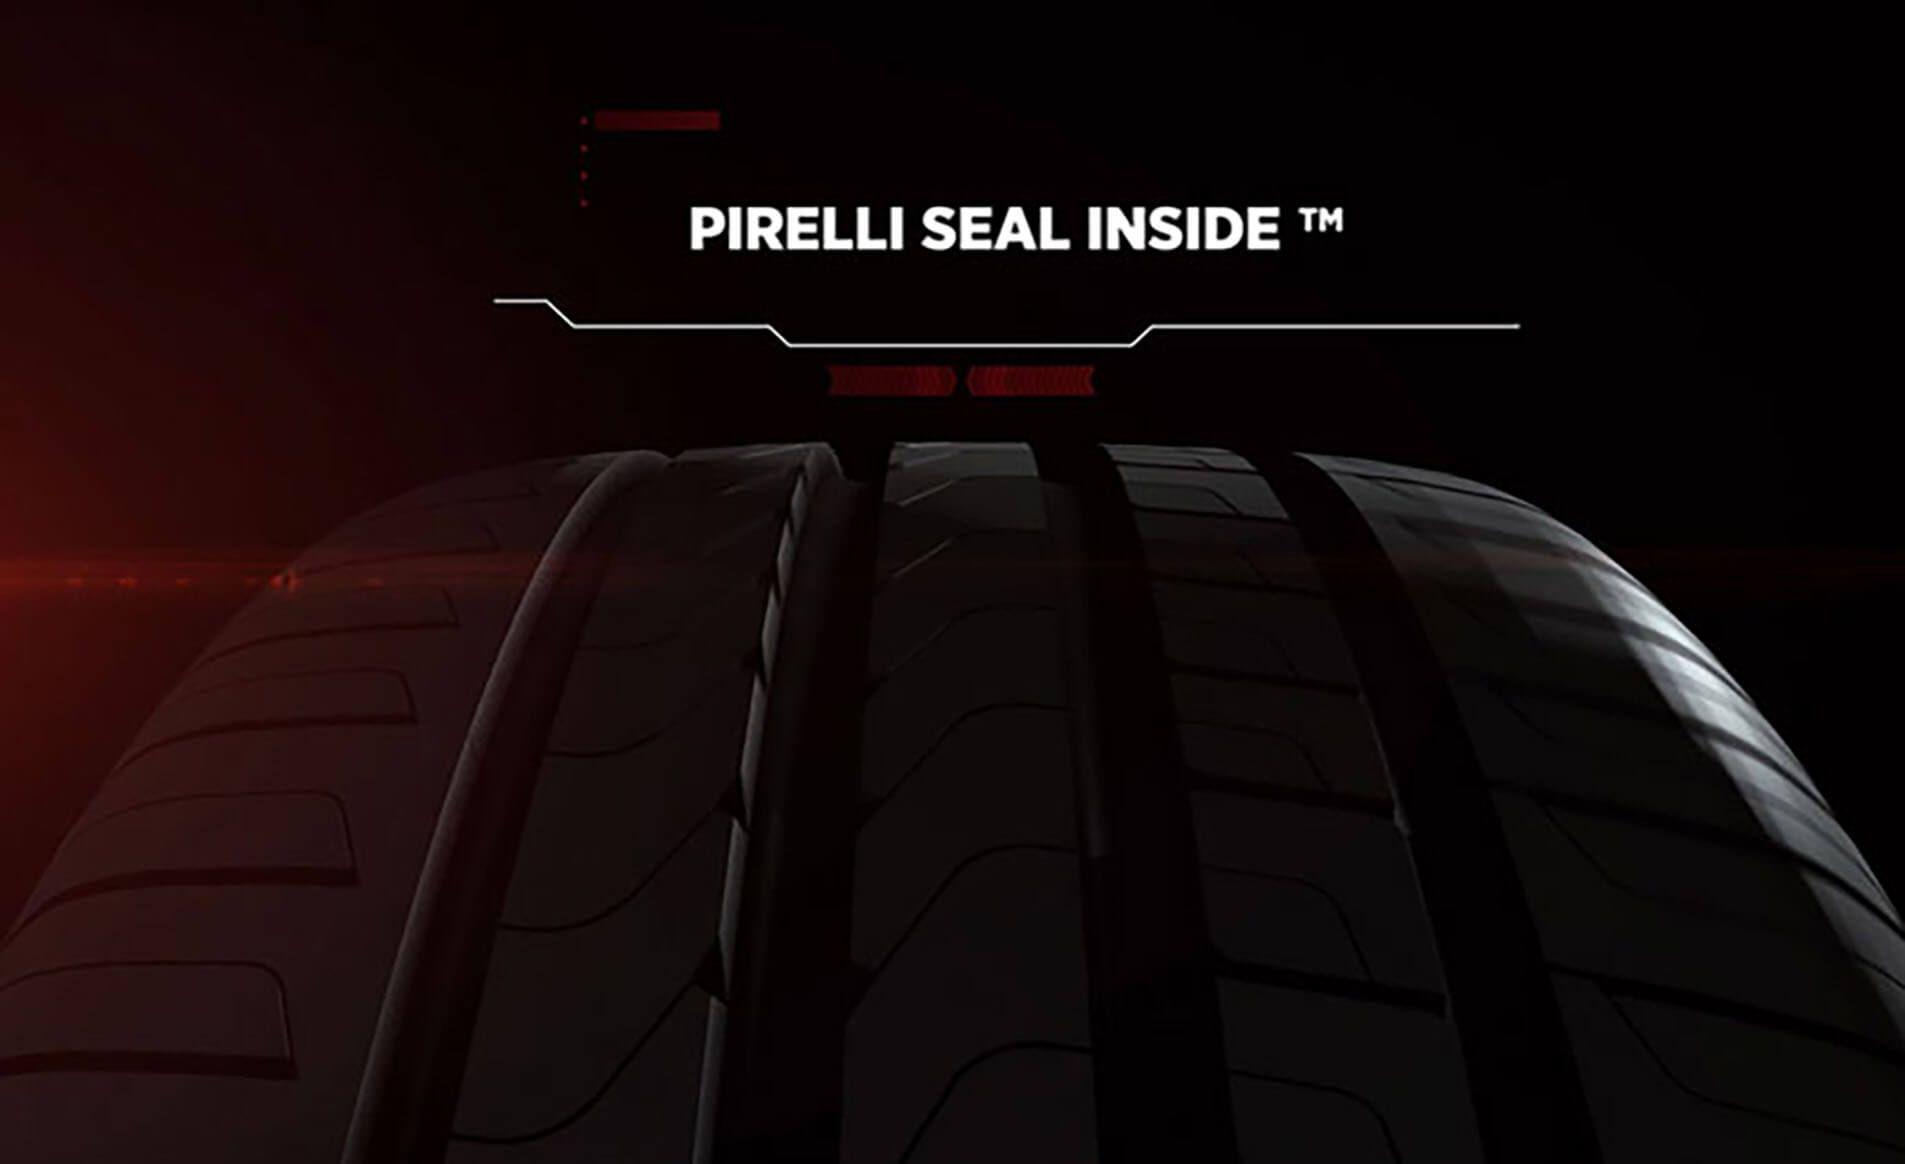 HOW SEAL INSIDE TYRES WORK